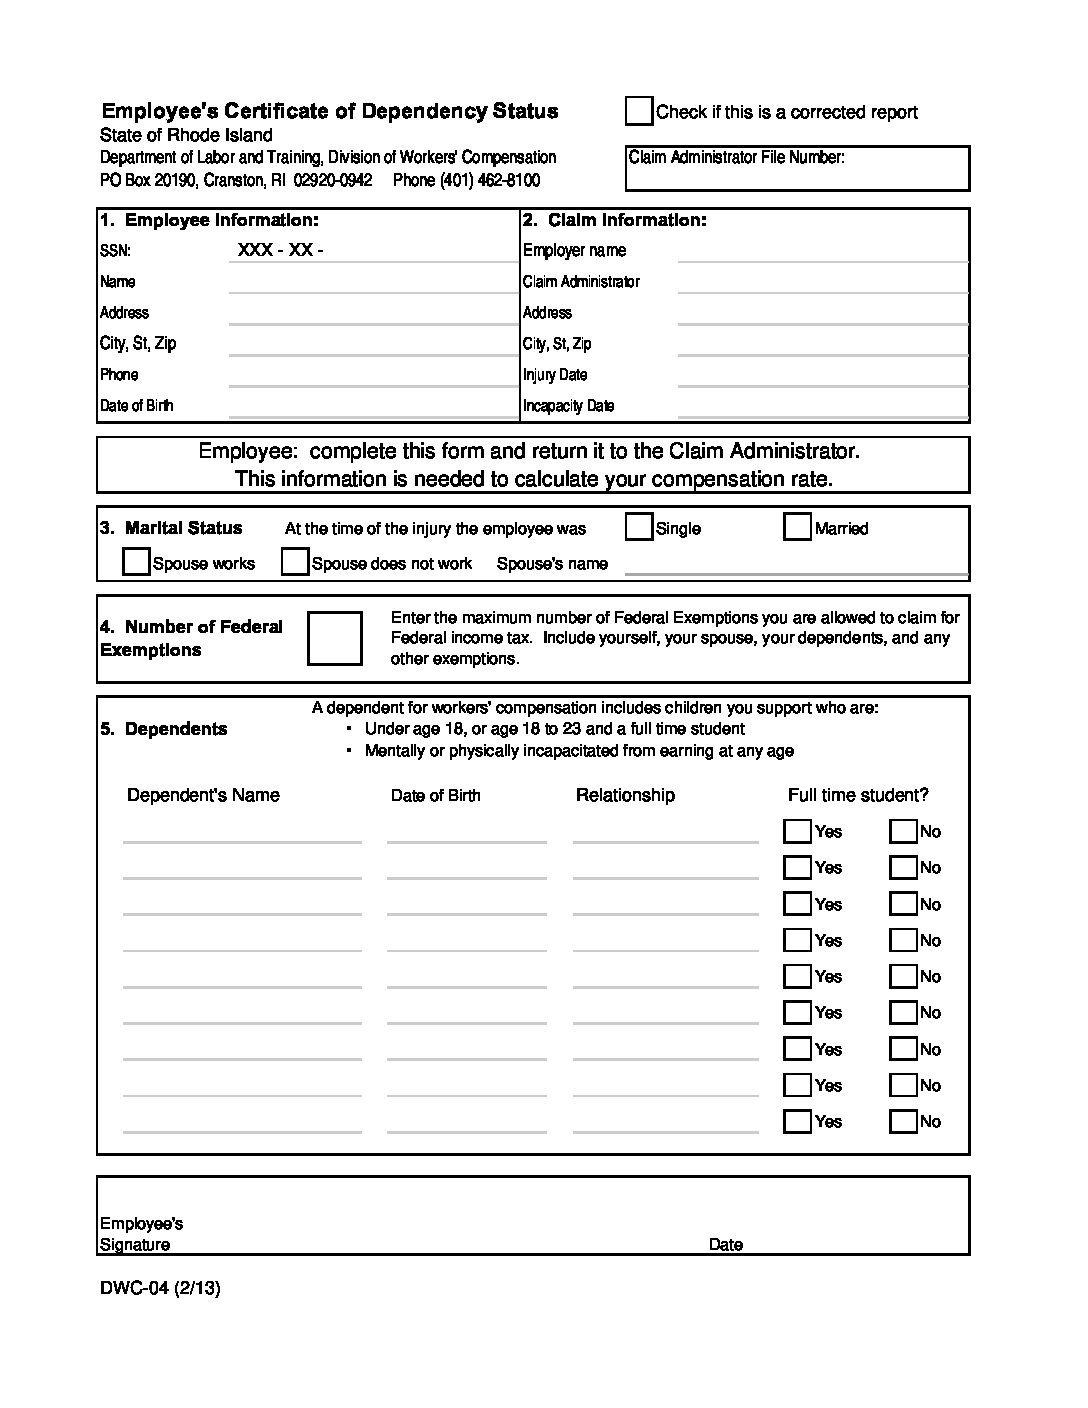 https://www.providenceri.gov/wp-content/uploads/2022/08/DWC-04-Employees-Certificate-of-Dependency-Status-Form-with-Instructions-pdf.jpg